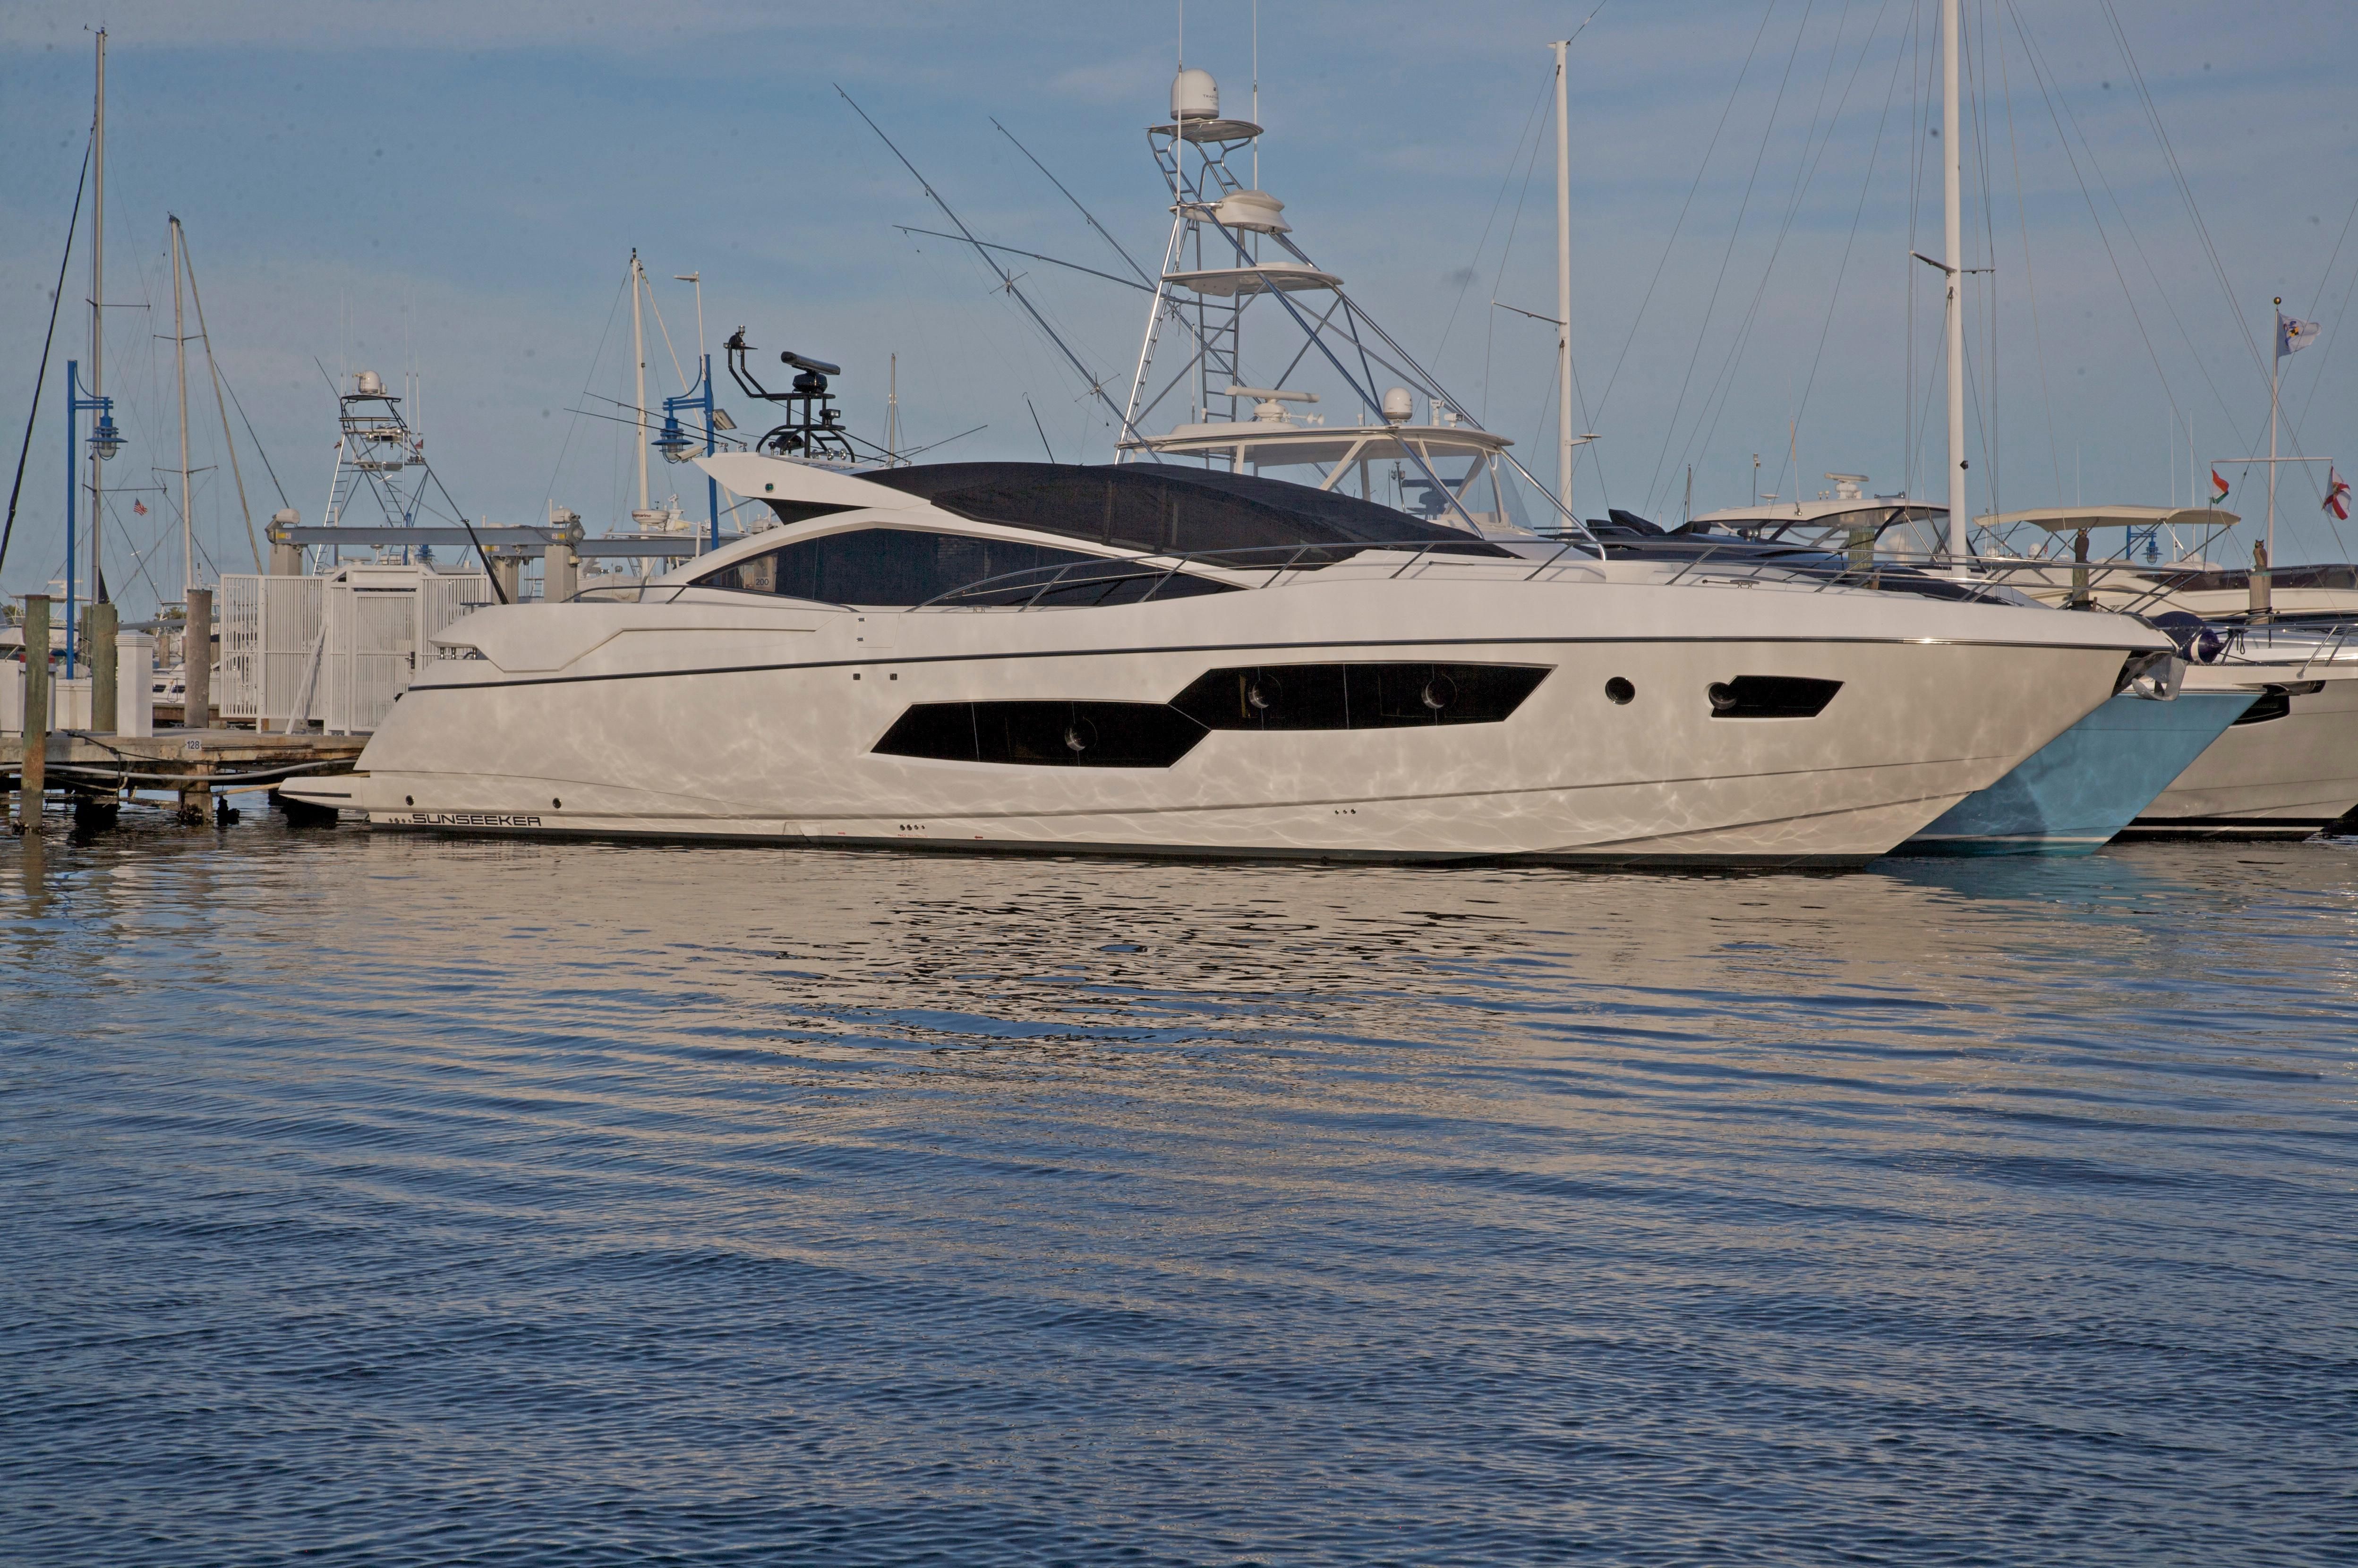 express cruiser yachts for sale